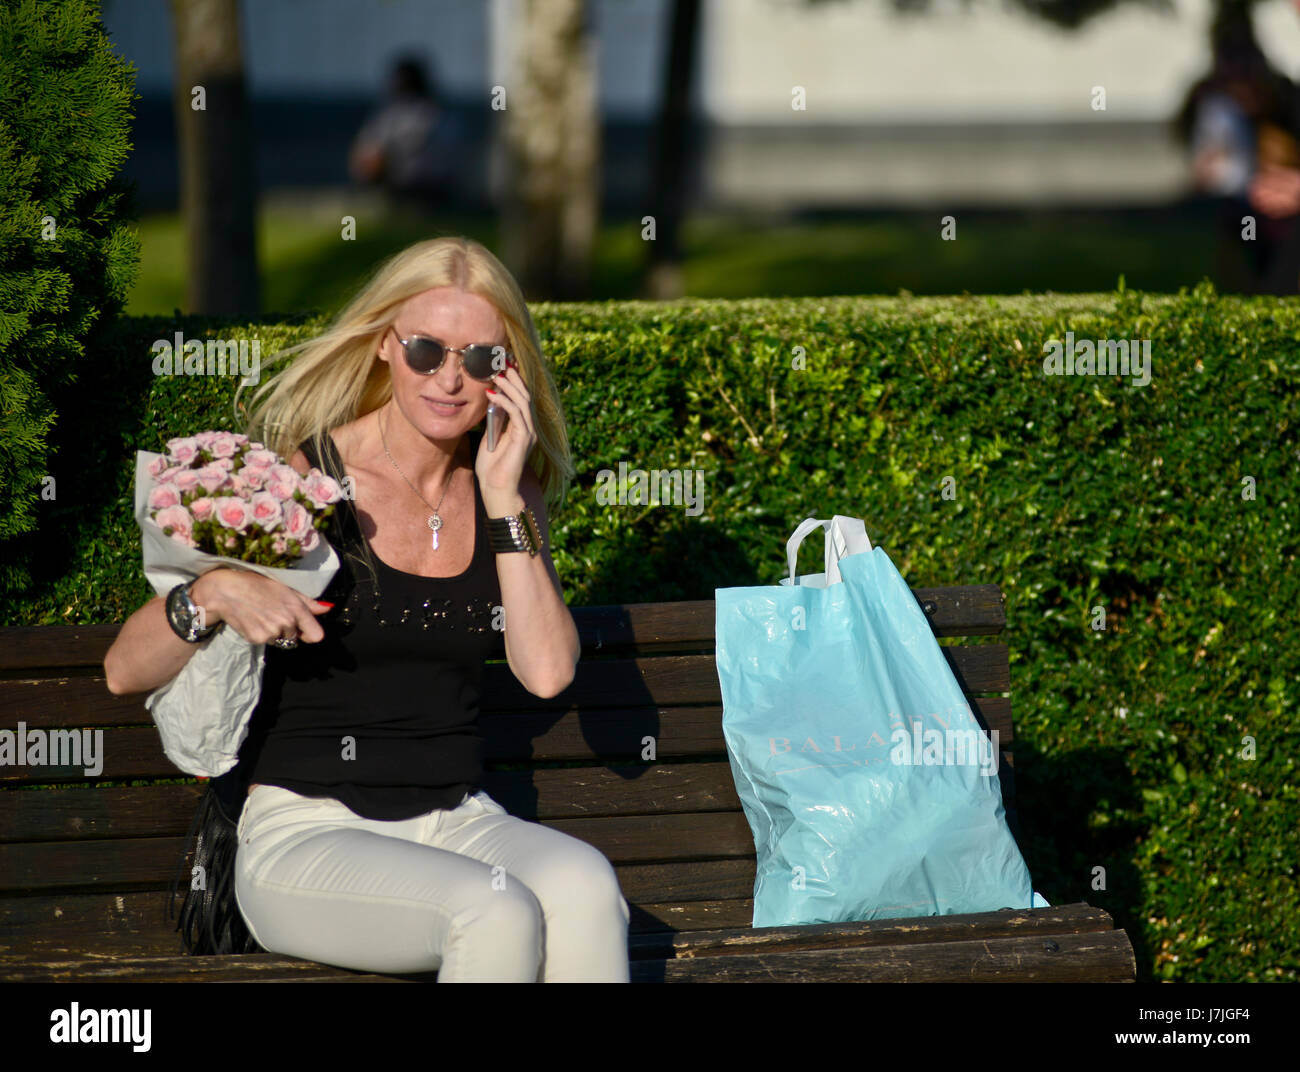 Blonde woman talking on the phone in a bench. Belgrade, Serbia Stock Photo